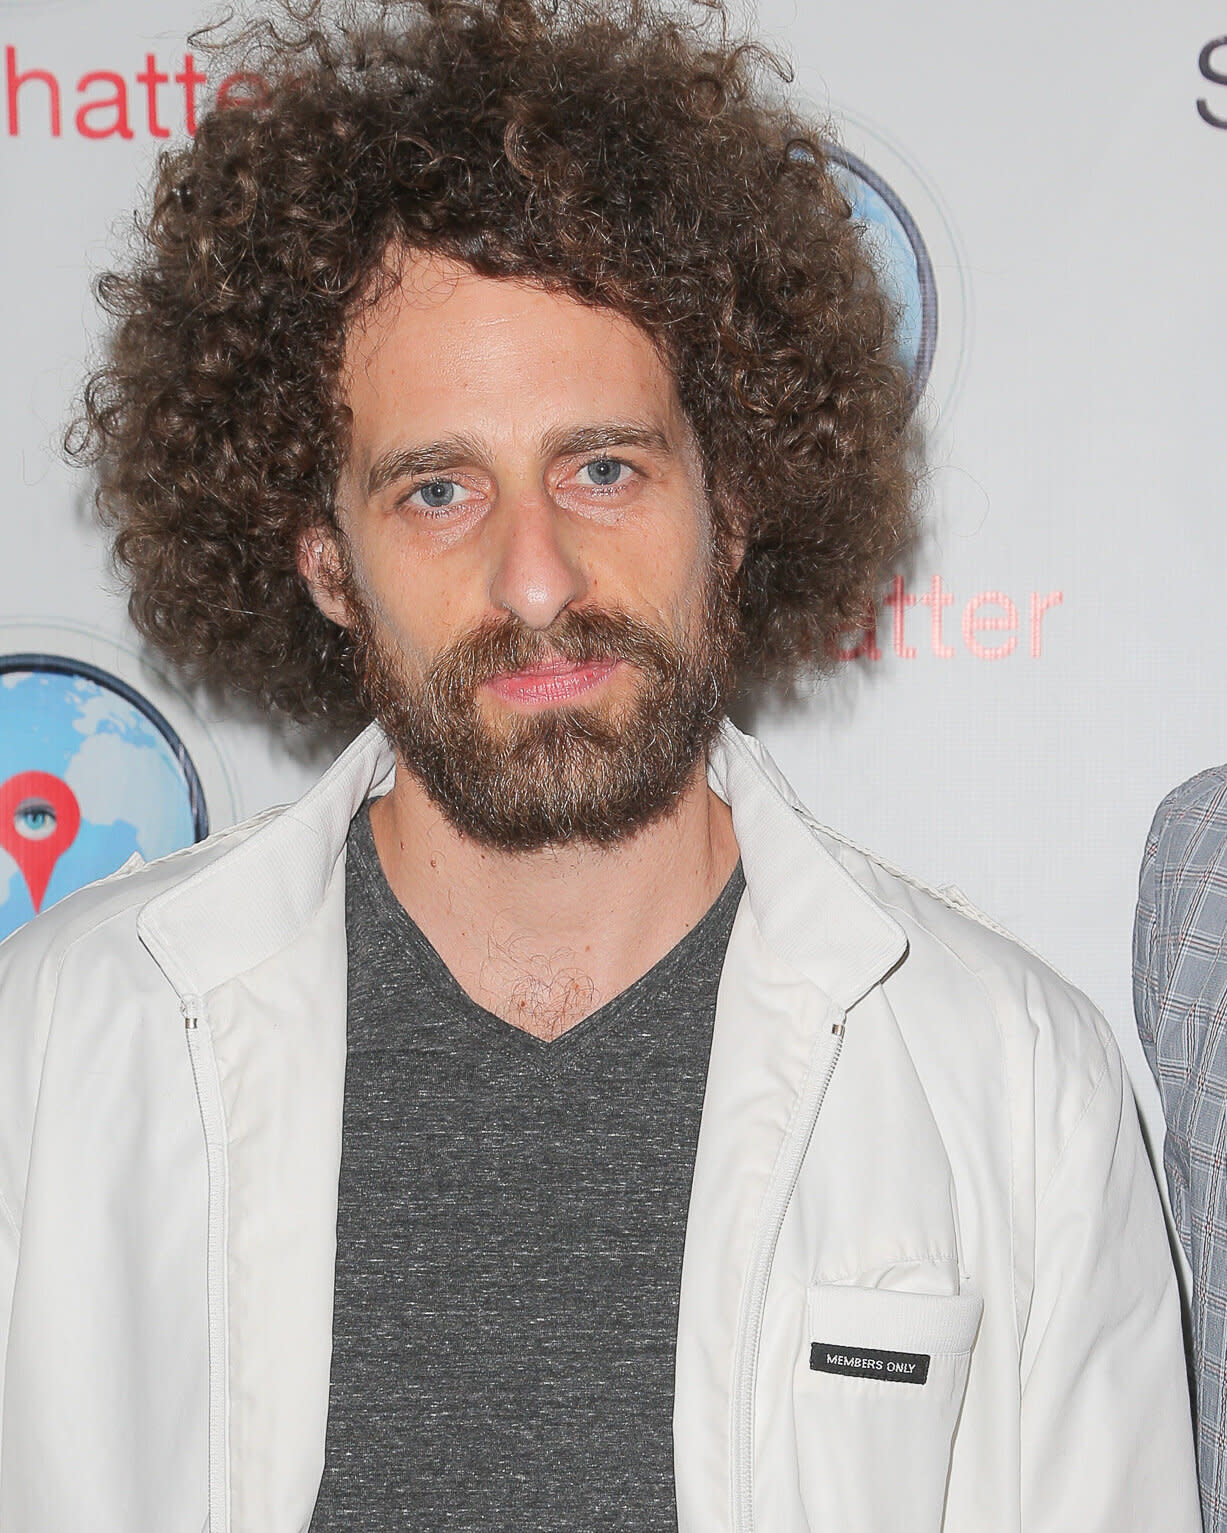 Actor Isaac Kappy, who appeared in Thor and Terminator, dead at 42